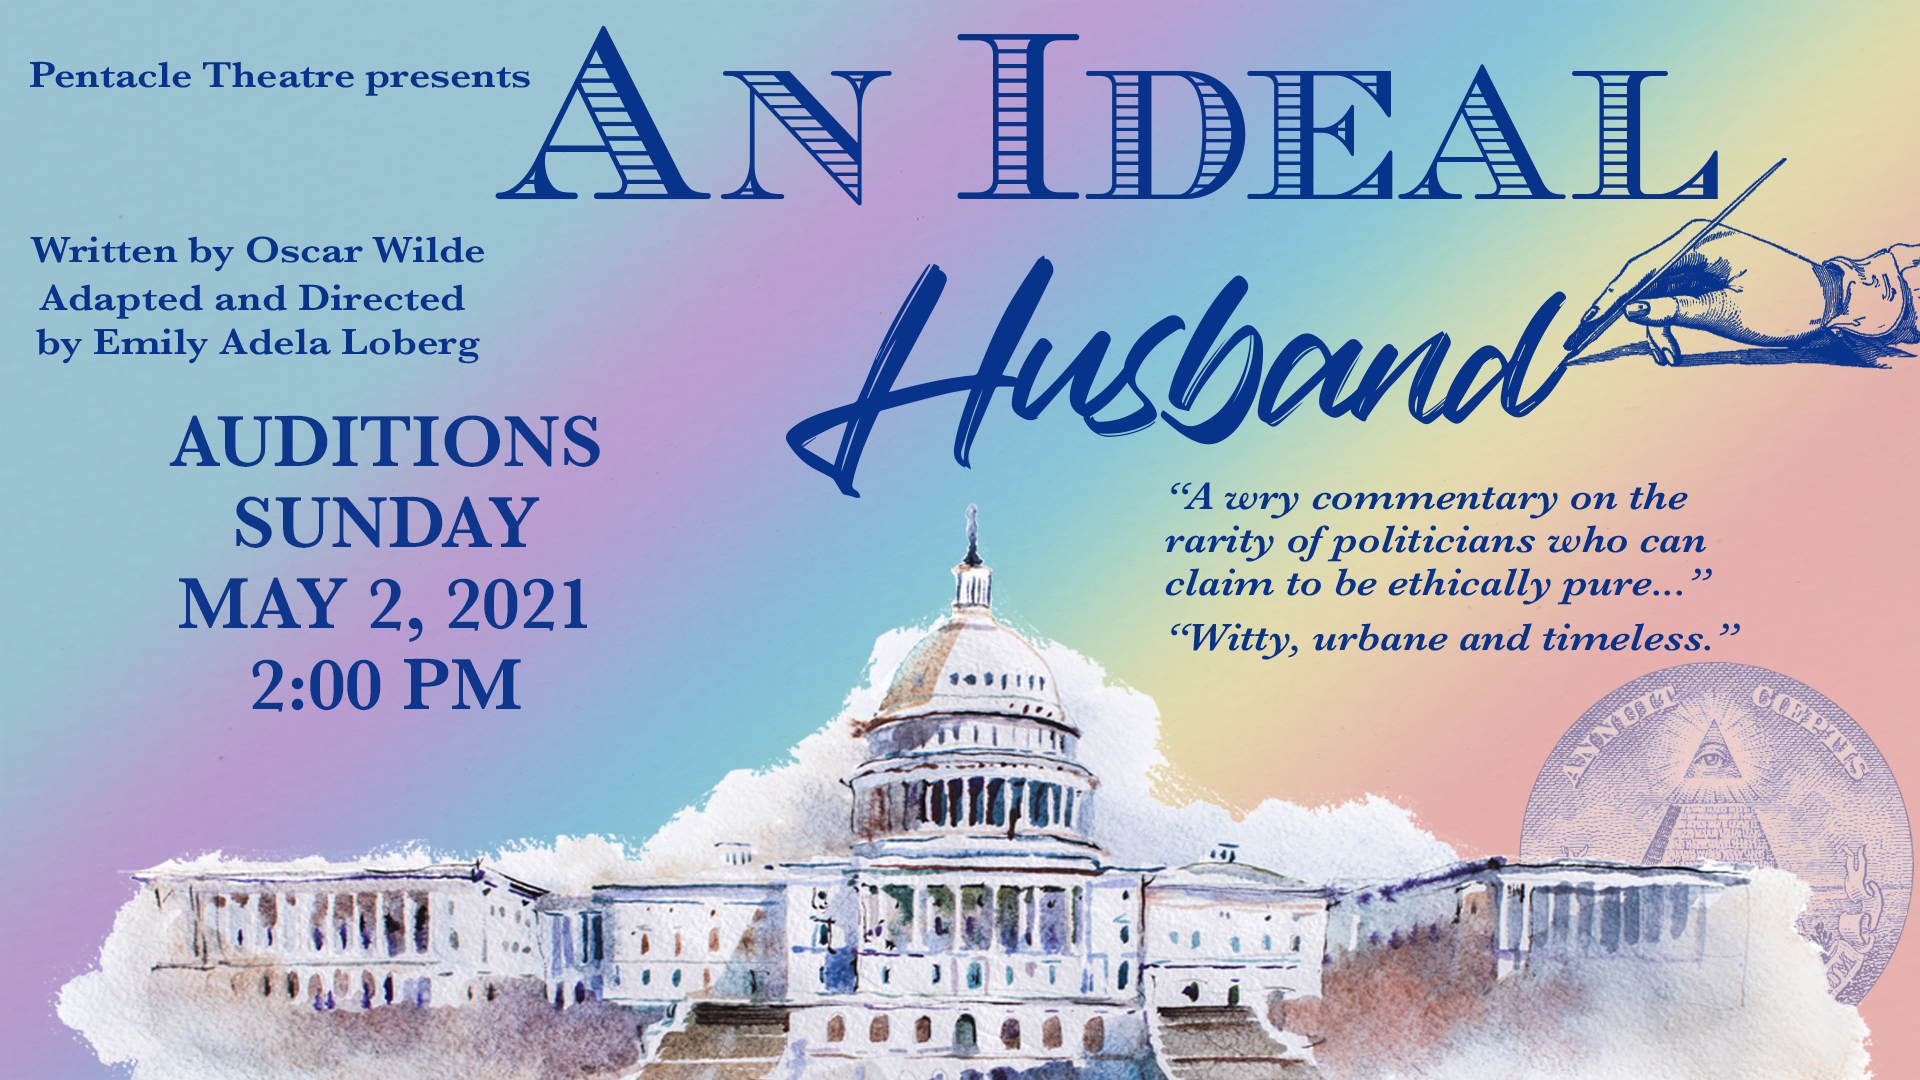 Open auditions for  Oscar Wilde comedy “An Ideal Husband”